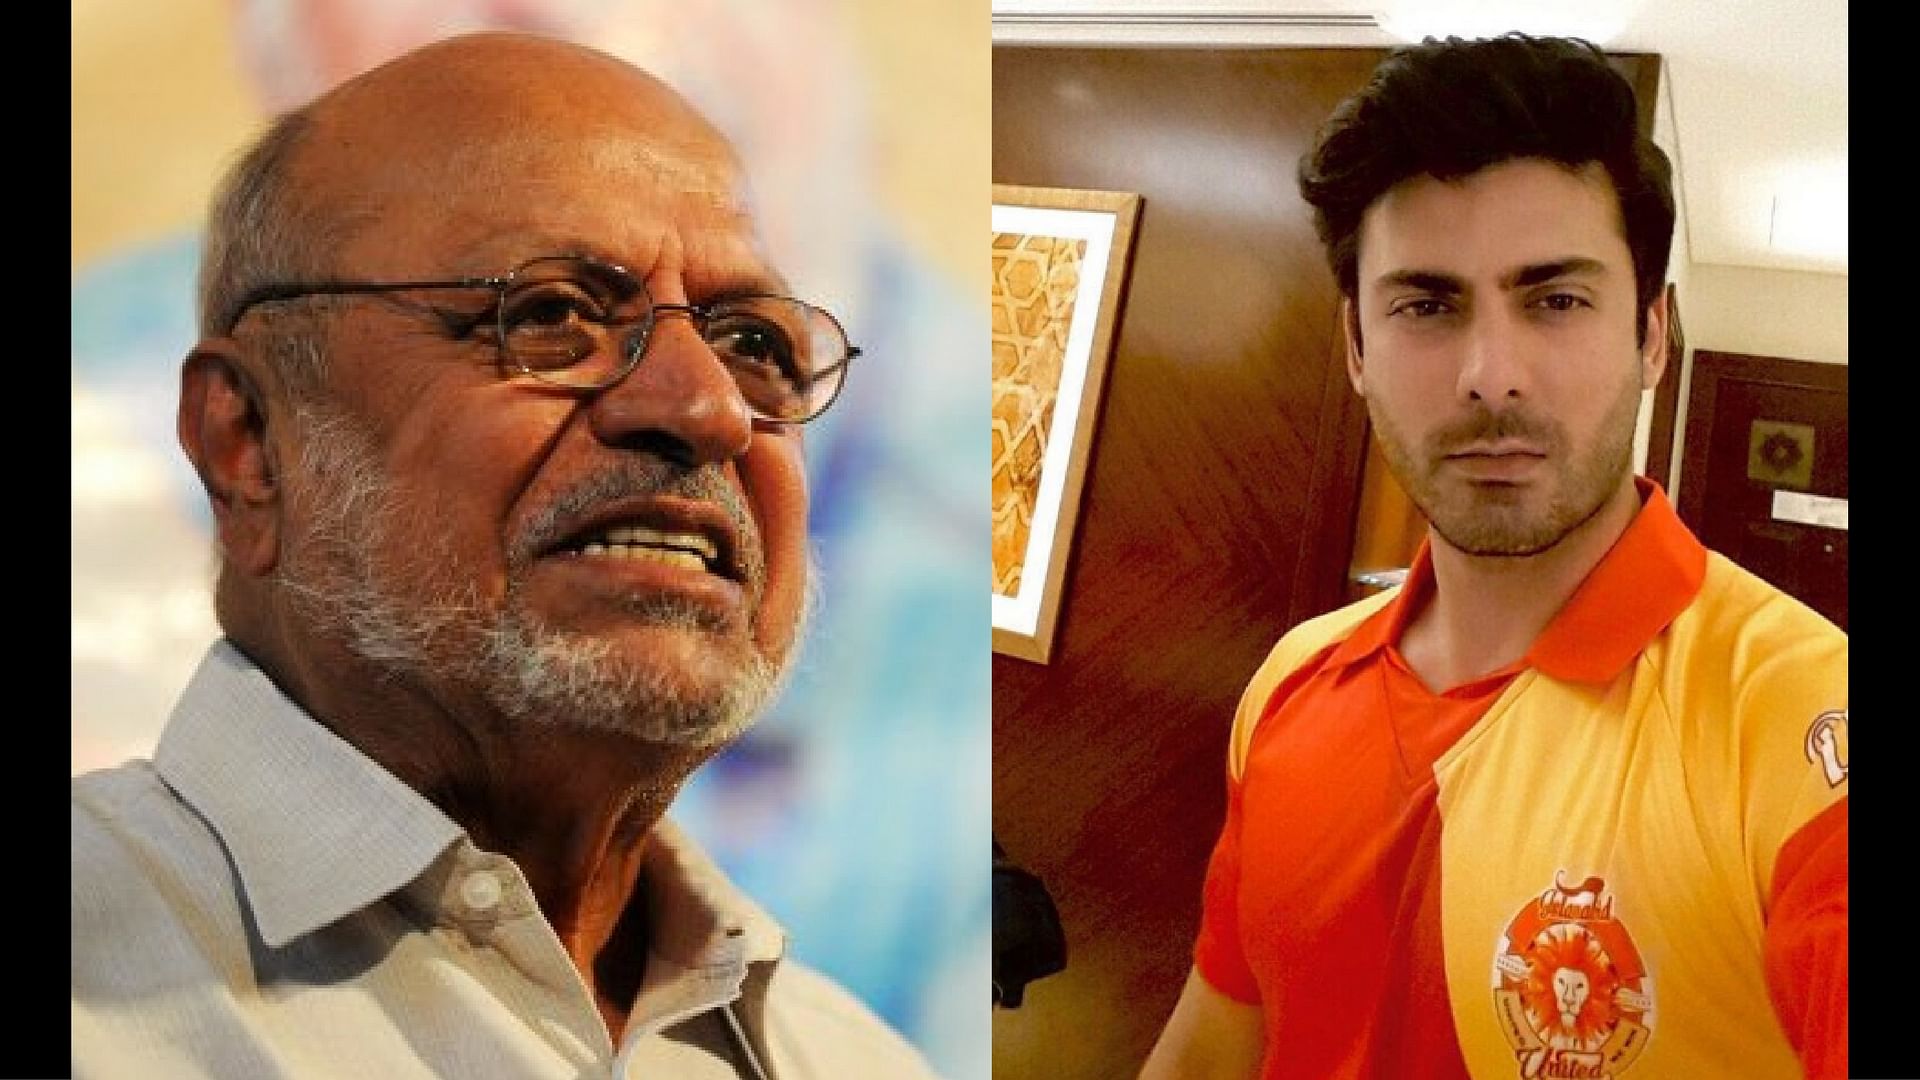 Shyam Benegal denies he is producing any film with a Indo-Pak theme involving Fawad Khan. (Photo courtesy: Twitter / Instagram)